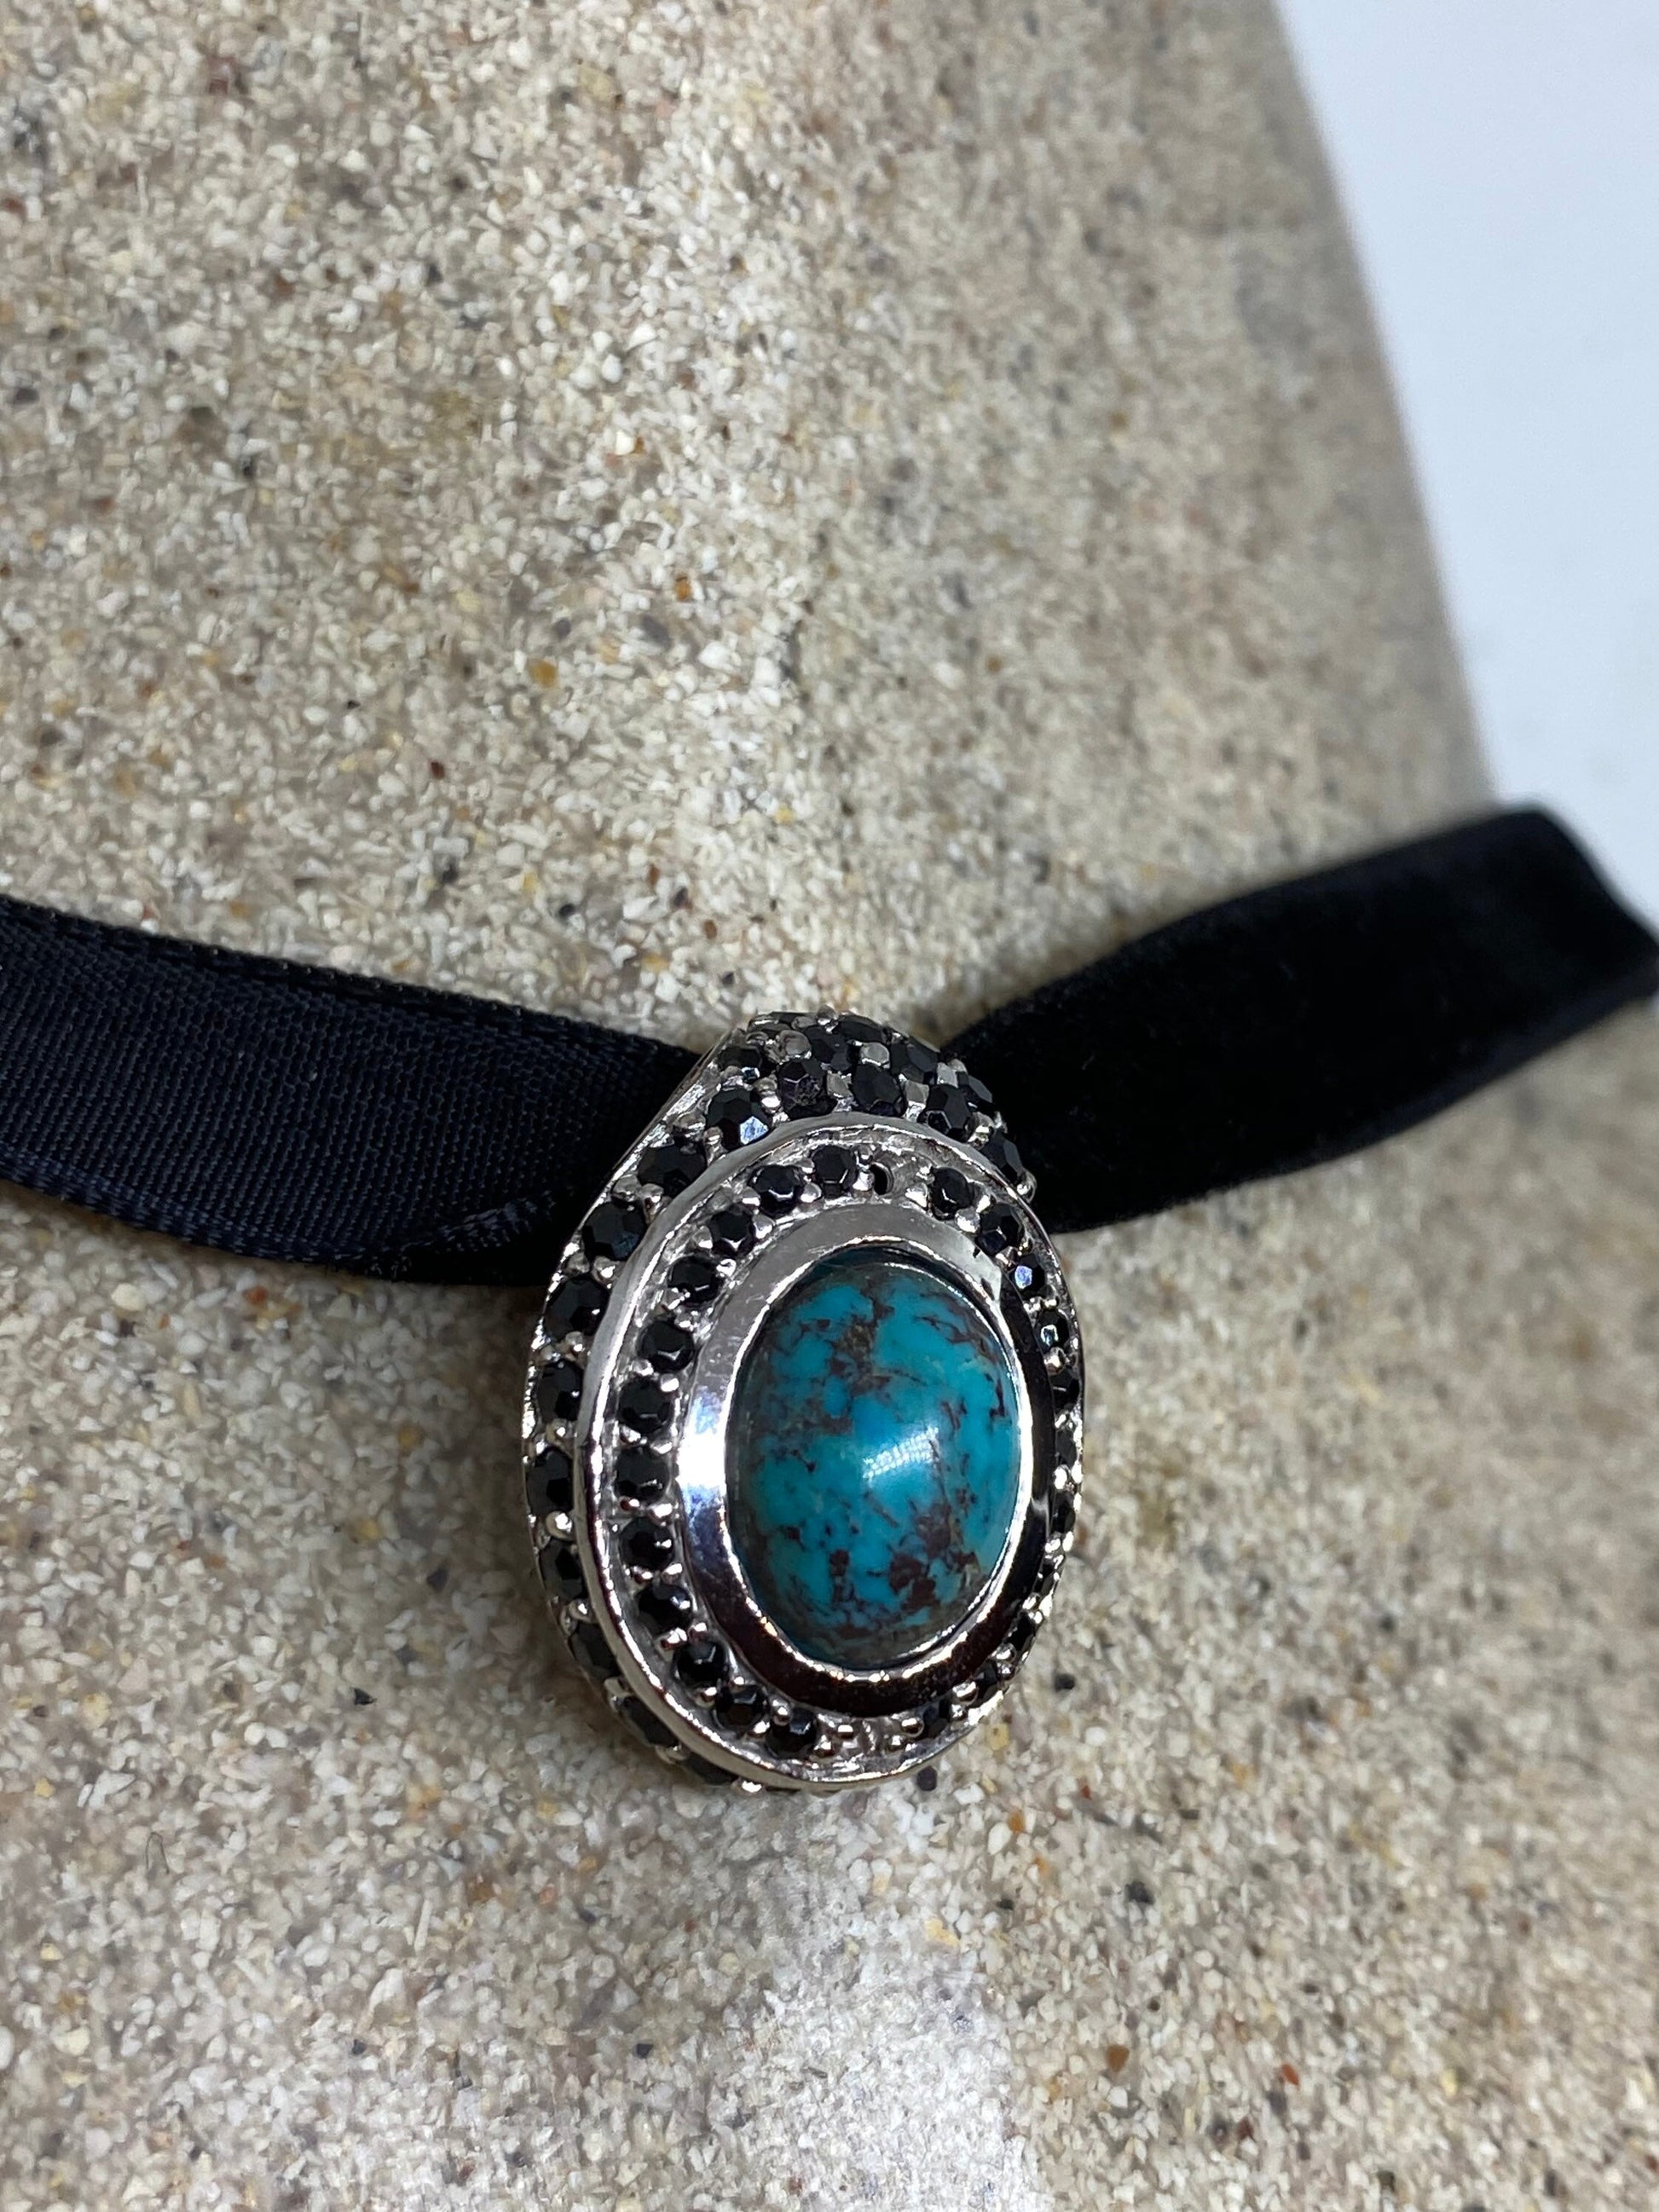 Vintage Handmade 925 Sterling Silver Sapphire Turquoise Pendant